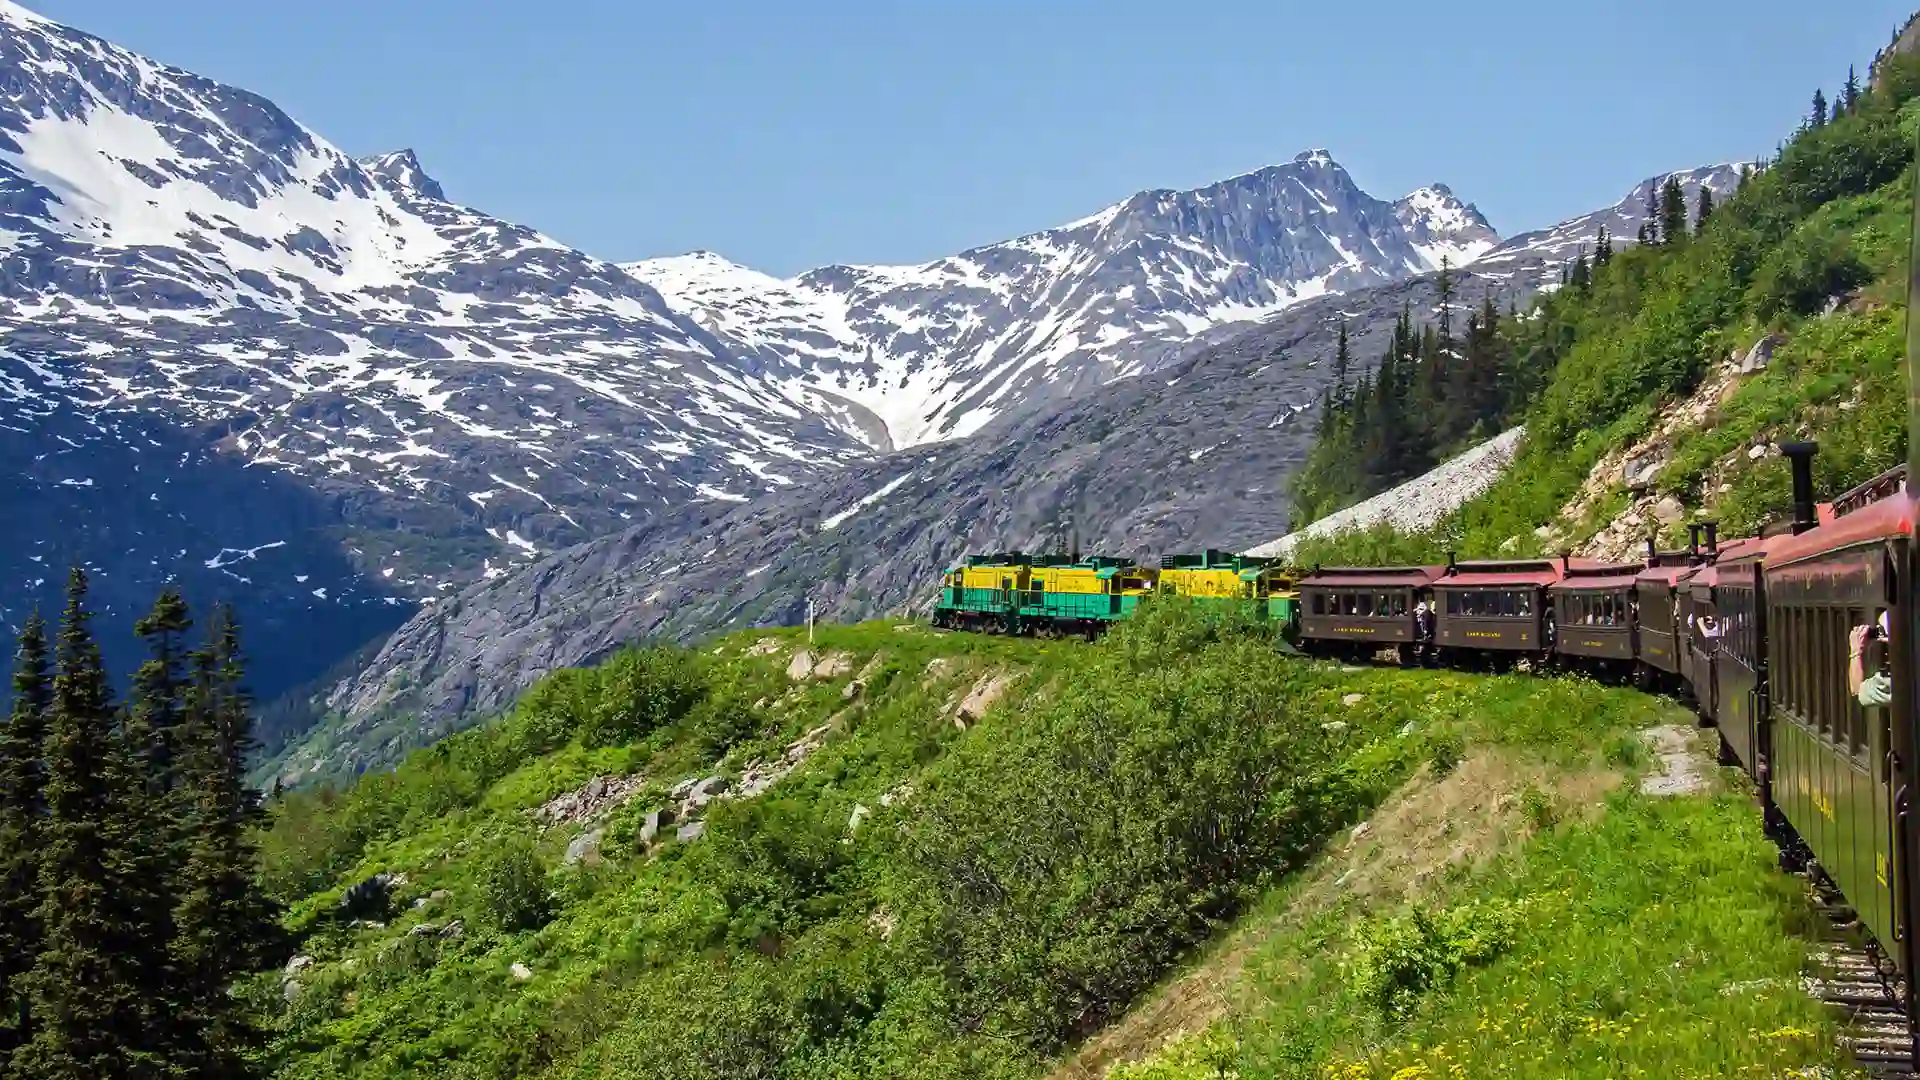 View of train through rocky and lush landscape.